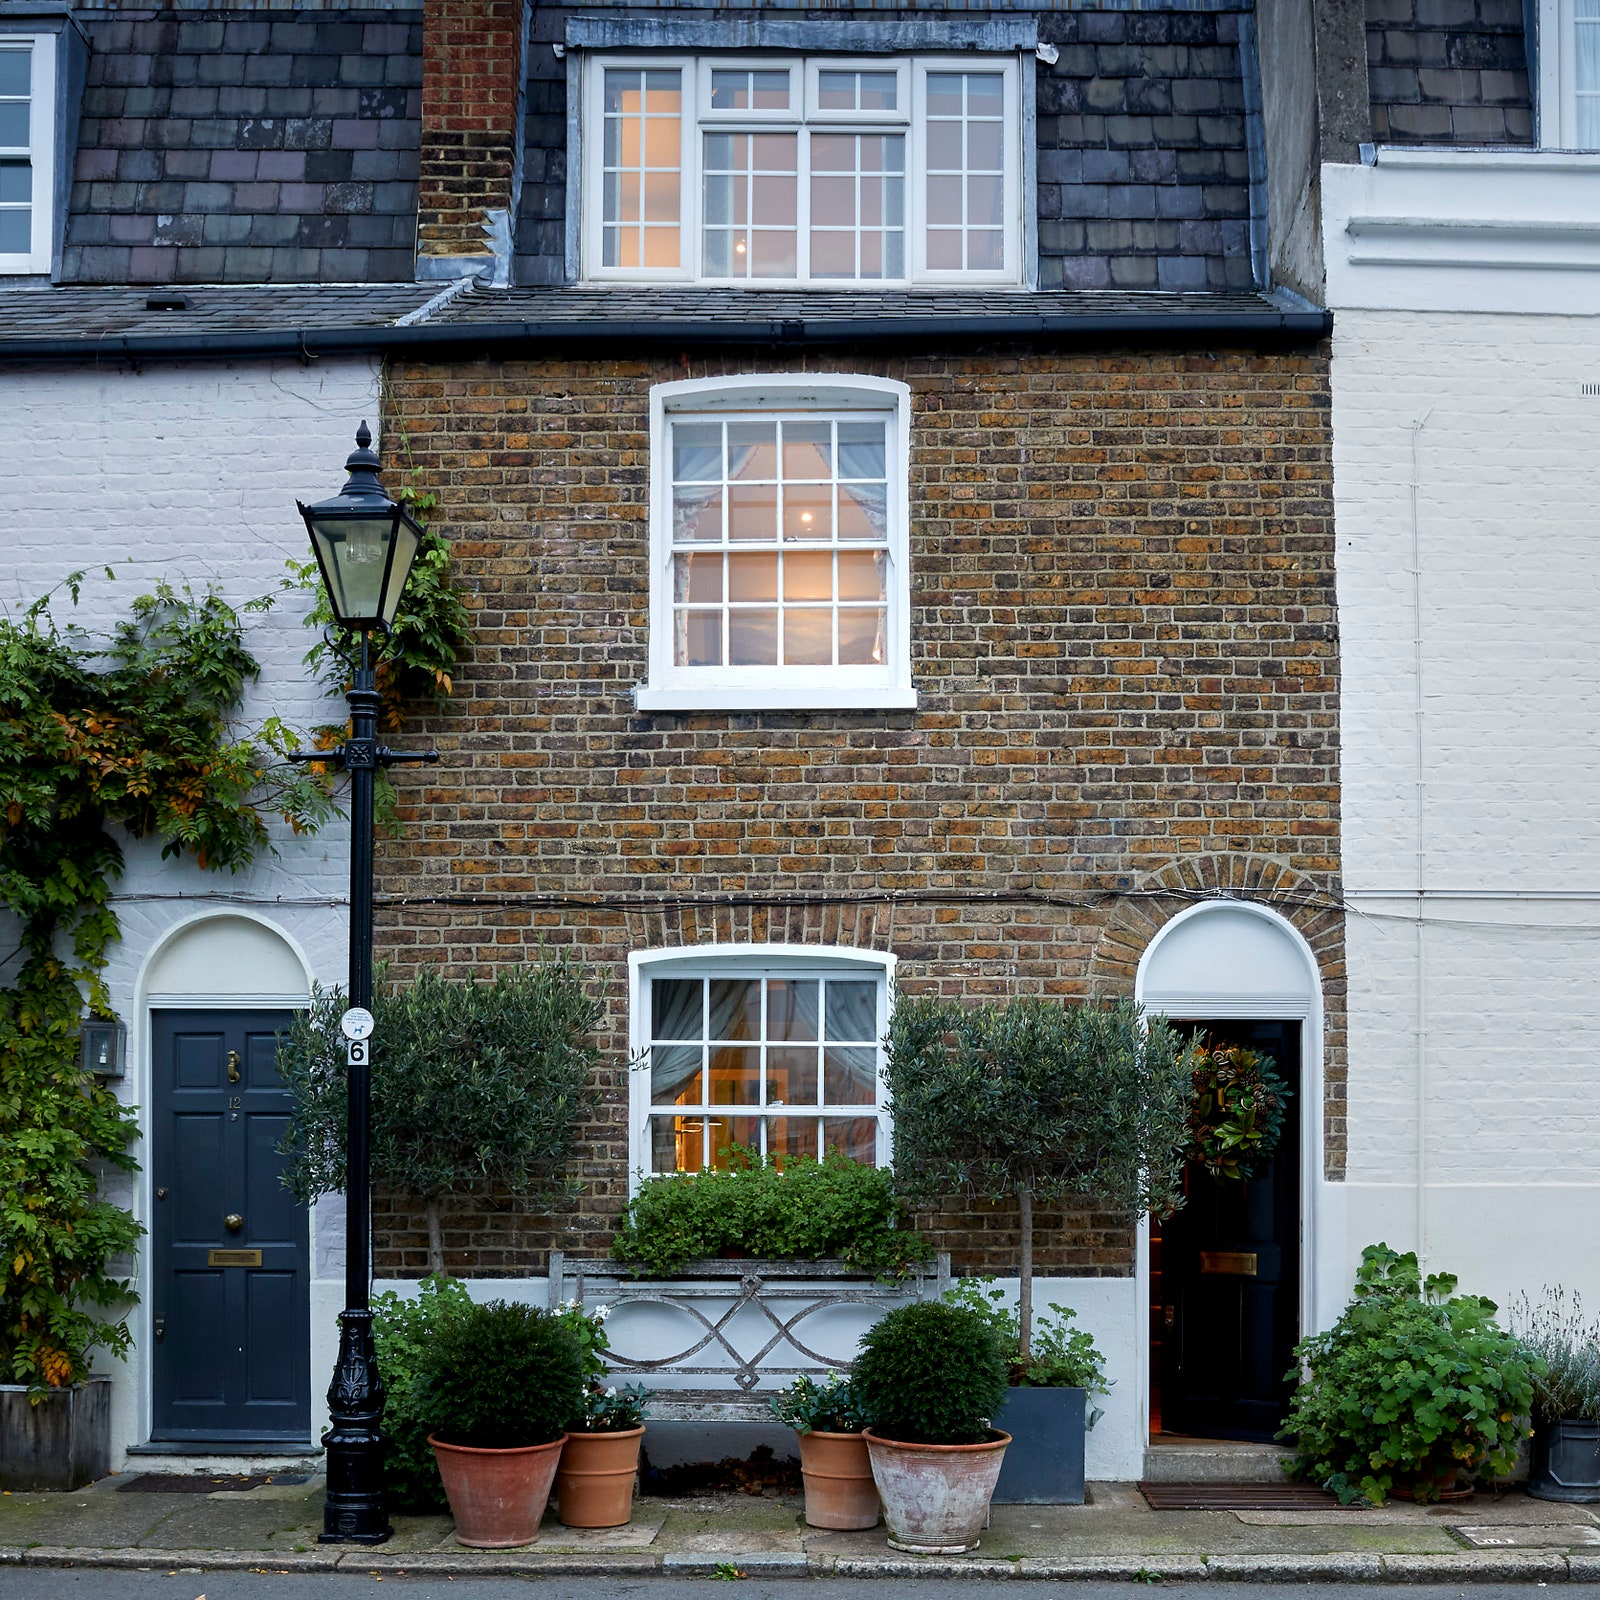 15 small front garden ideas for every budget